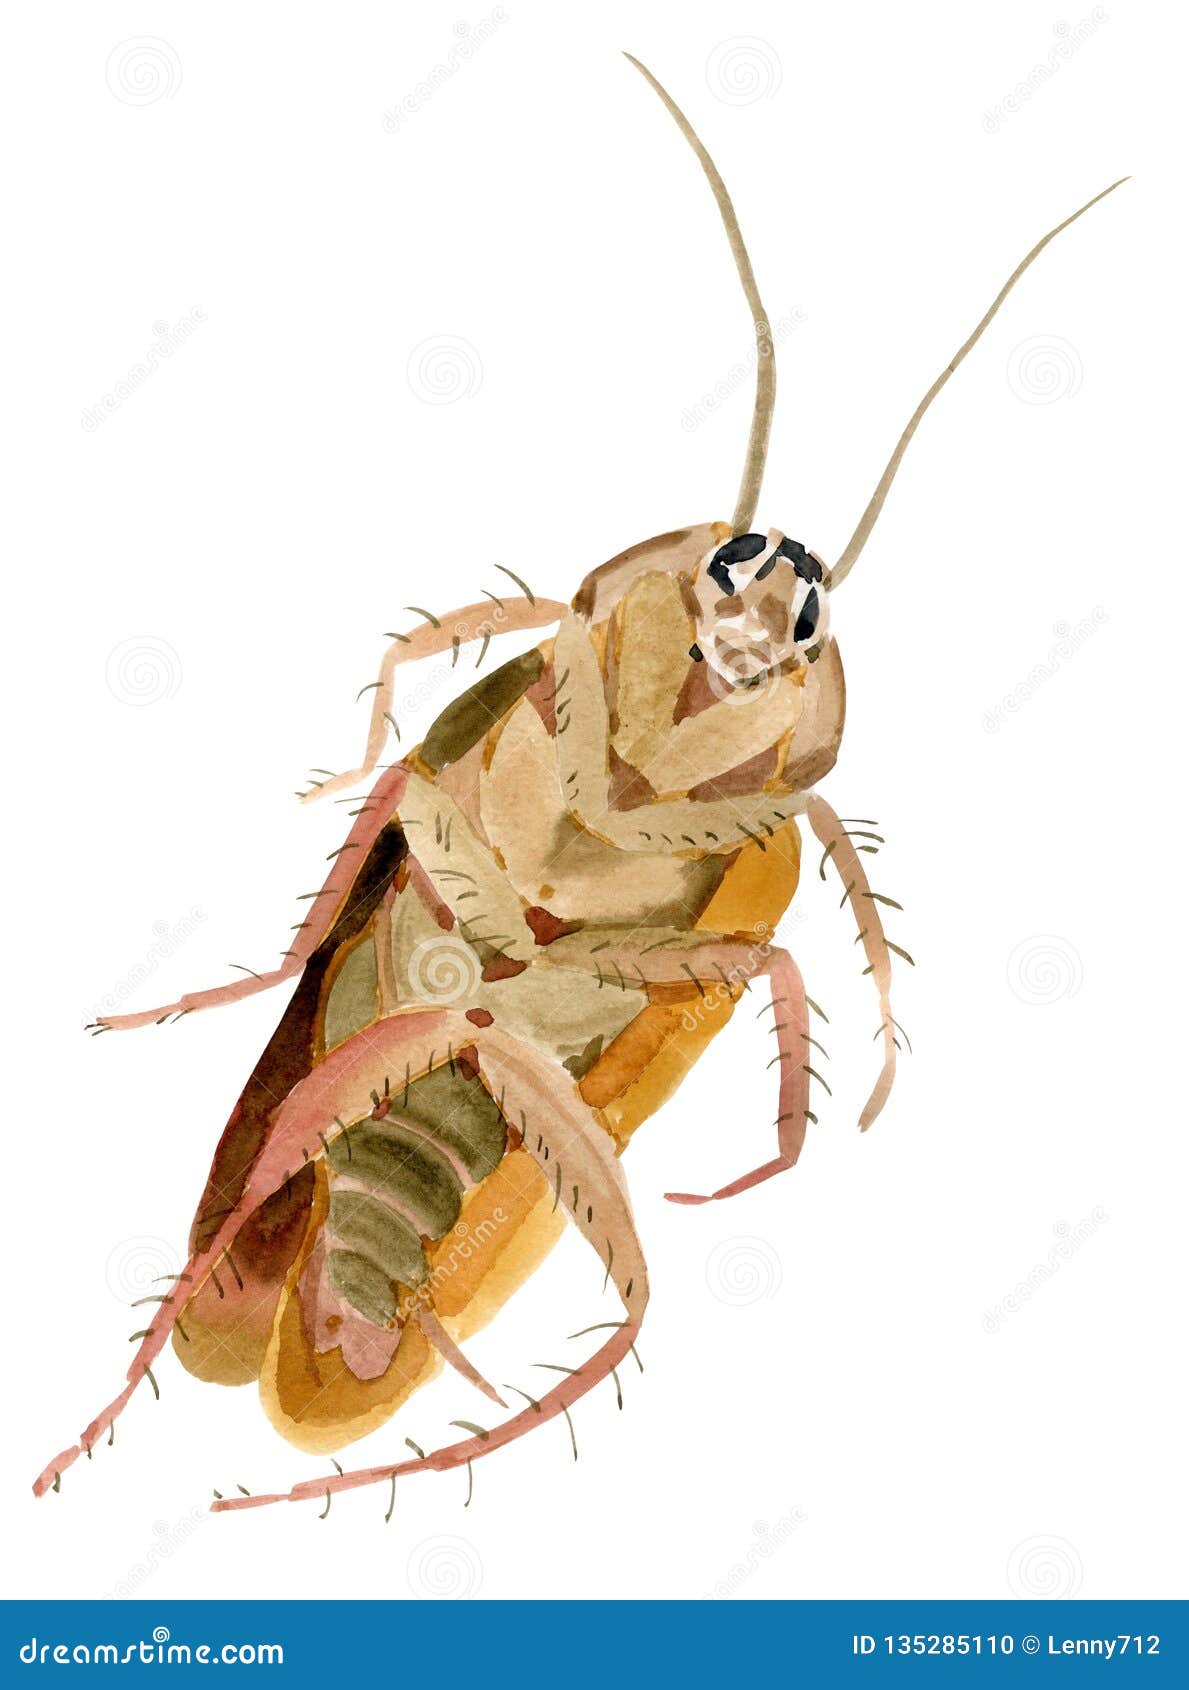 Handwork Watercolor Illustration Of An Insect Cockroach Stock ...